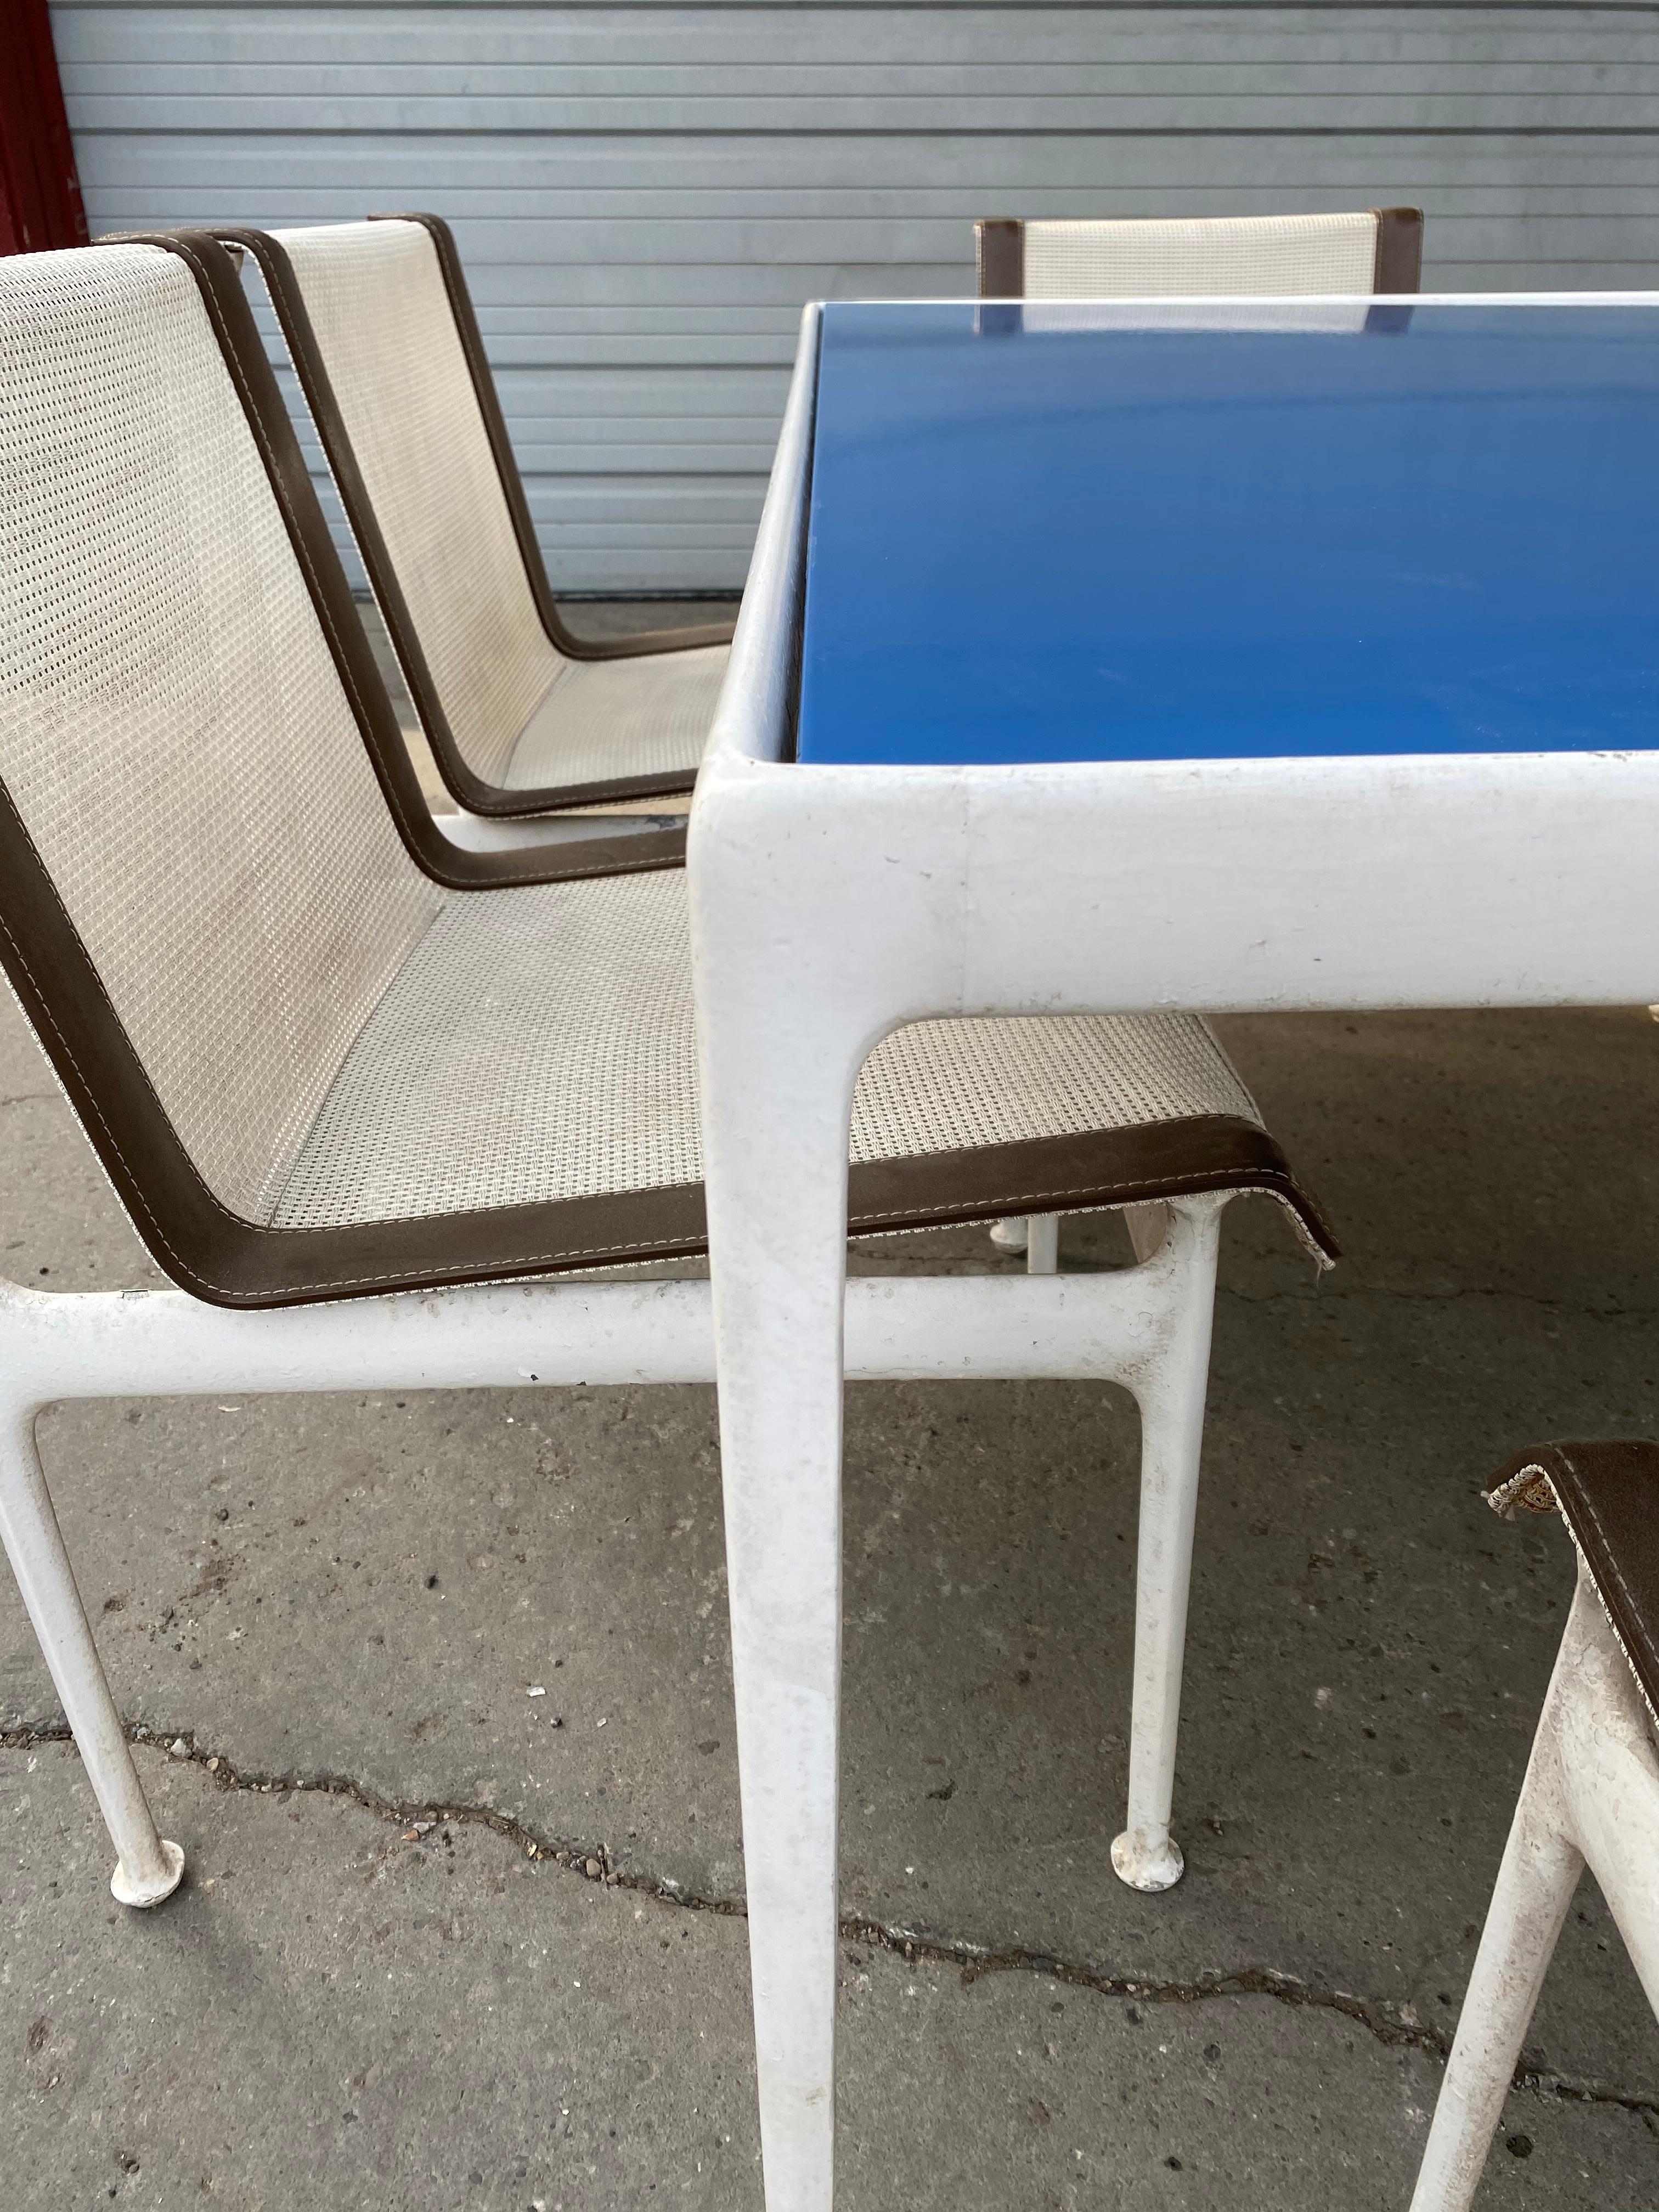 Early Richard Shultz for Knoll outdoor dining set, circa 1966 powder-coated aluminum table base with stunning blue enamel top, retains original set of 6 side dining chairs. Also retains original early Knoll label, some staining, dis-coloration and